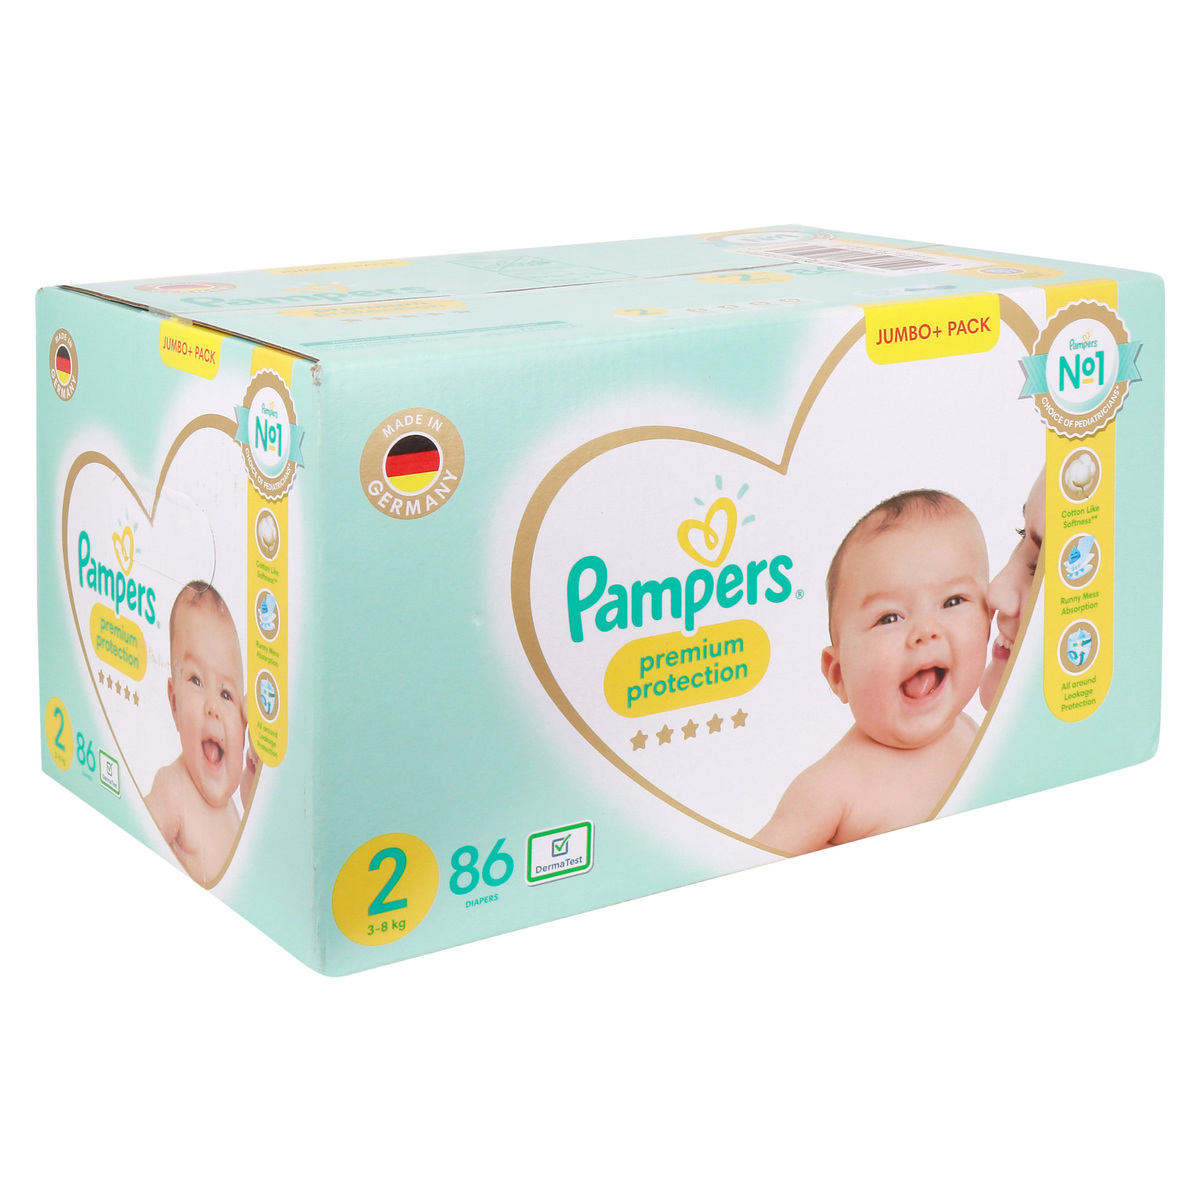 Pampers Premium Baby Diapers Size 2, 3-8kg Jumbo Pack 86pcs